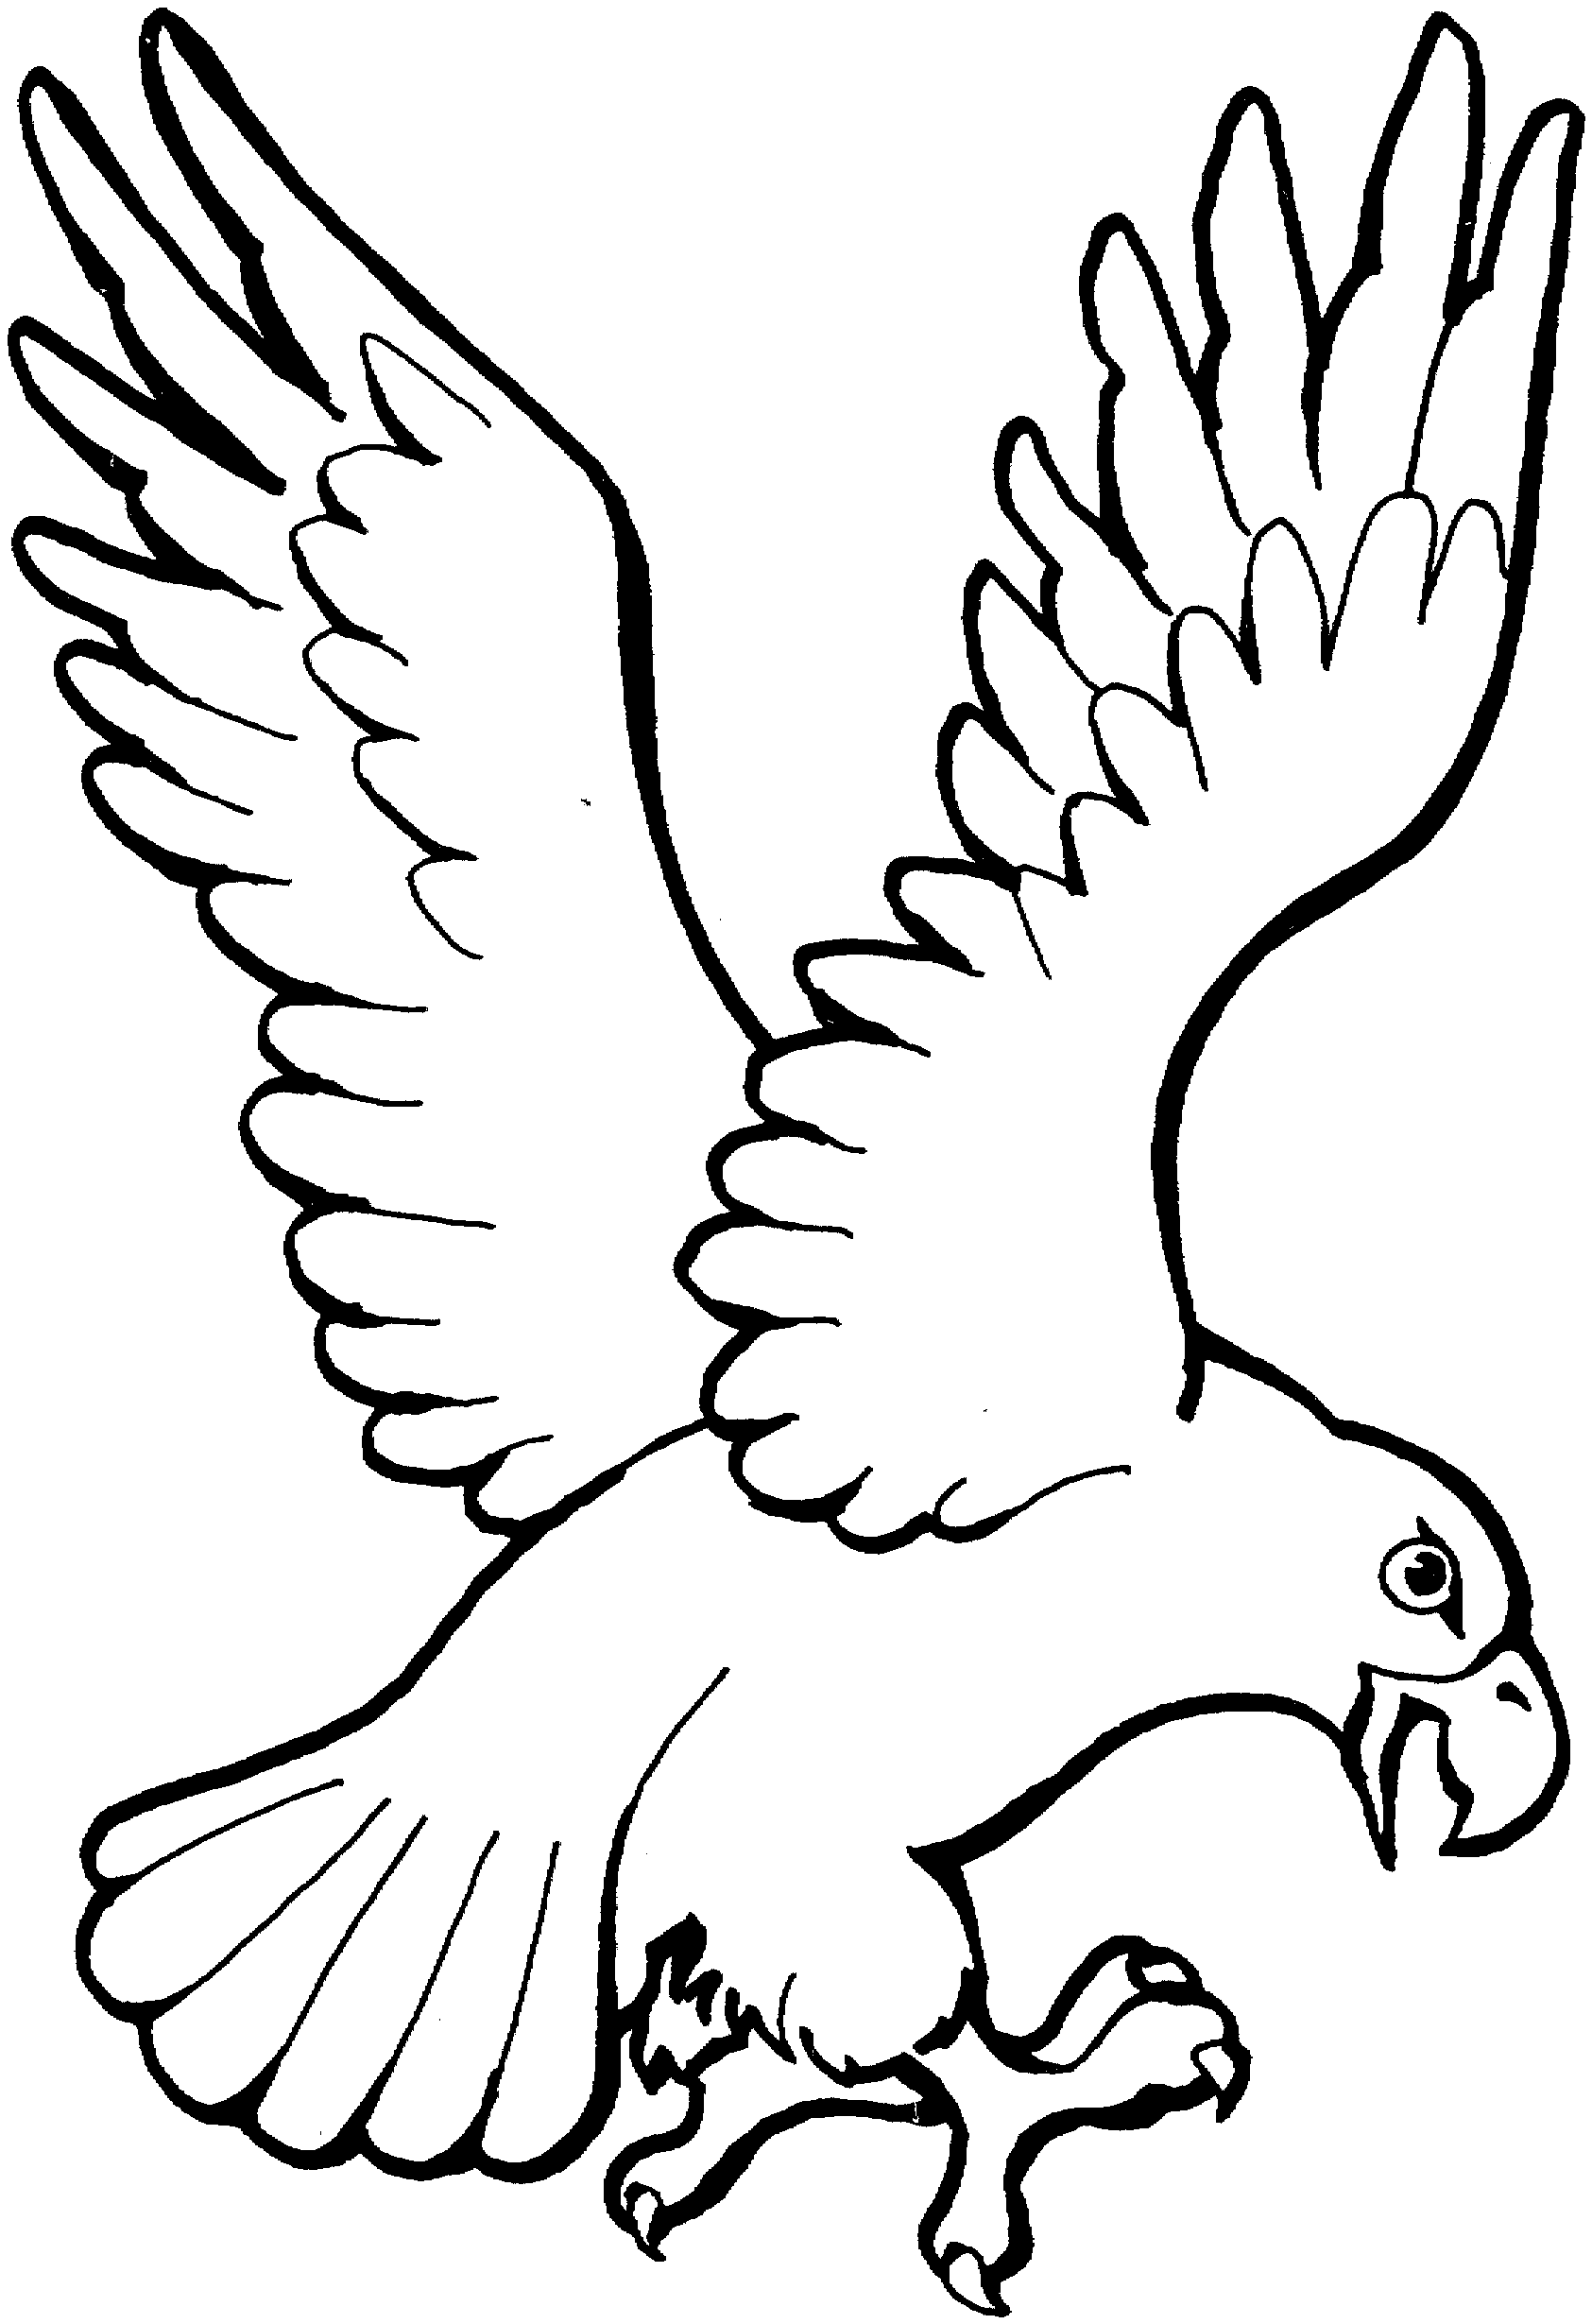 coloring book eagle free eagle coloring pages coloring eagle book 